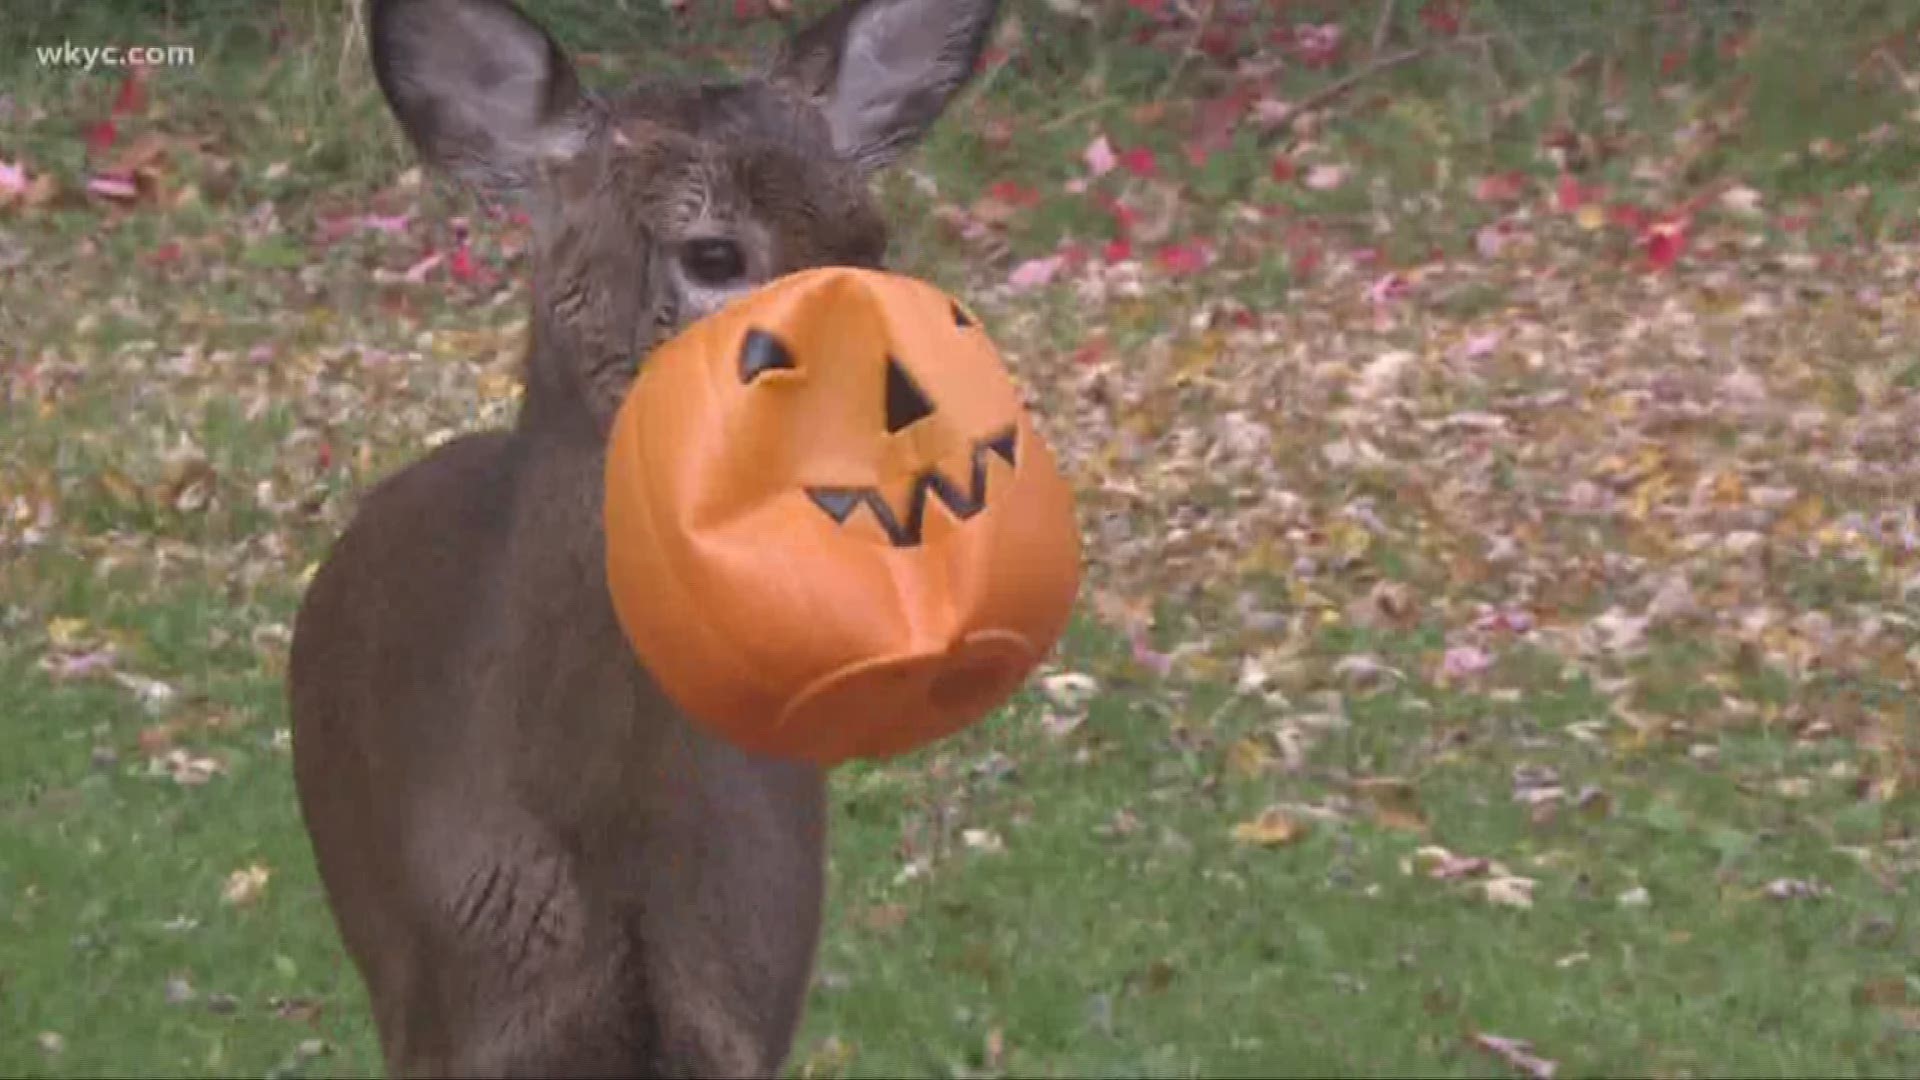 Nov. 13, 2017: Free at last. After days with a plastic pumpkin stuck to its face, a deer has been rescued in South Euclid. Dozens of people had worked for days to try and help the animal, which had been in its predicament for more than a week.